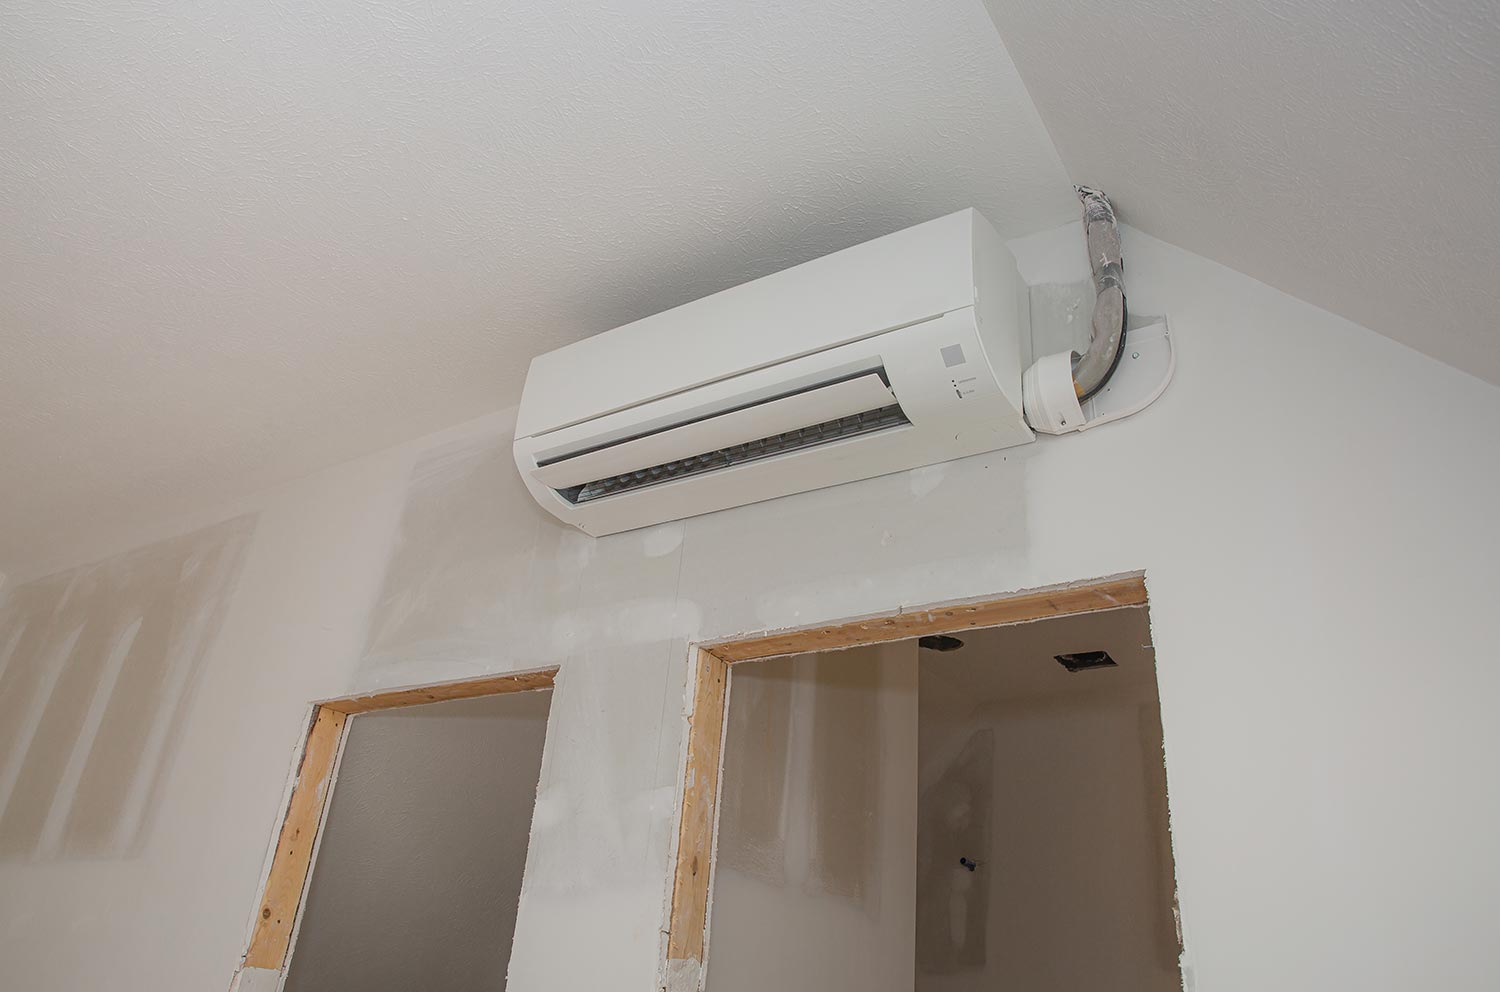 Ductless air conditioning unit installed in unfinished room